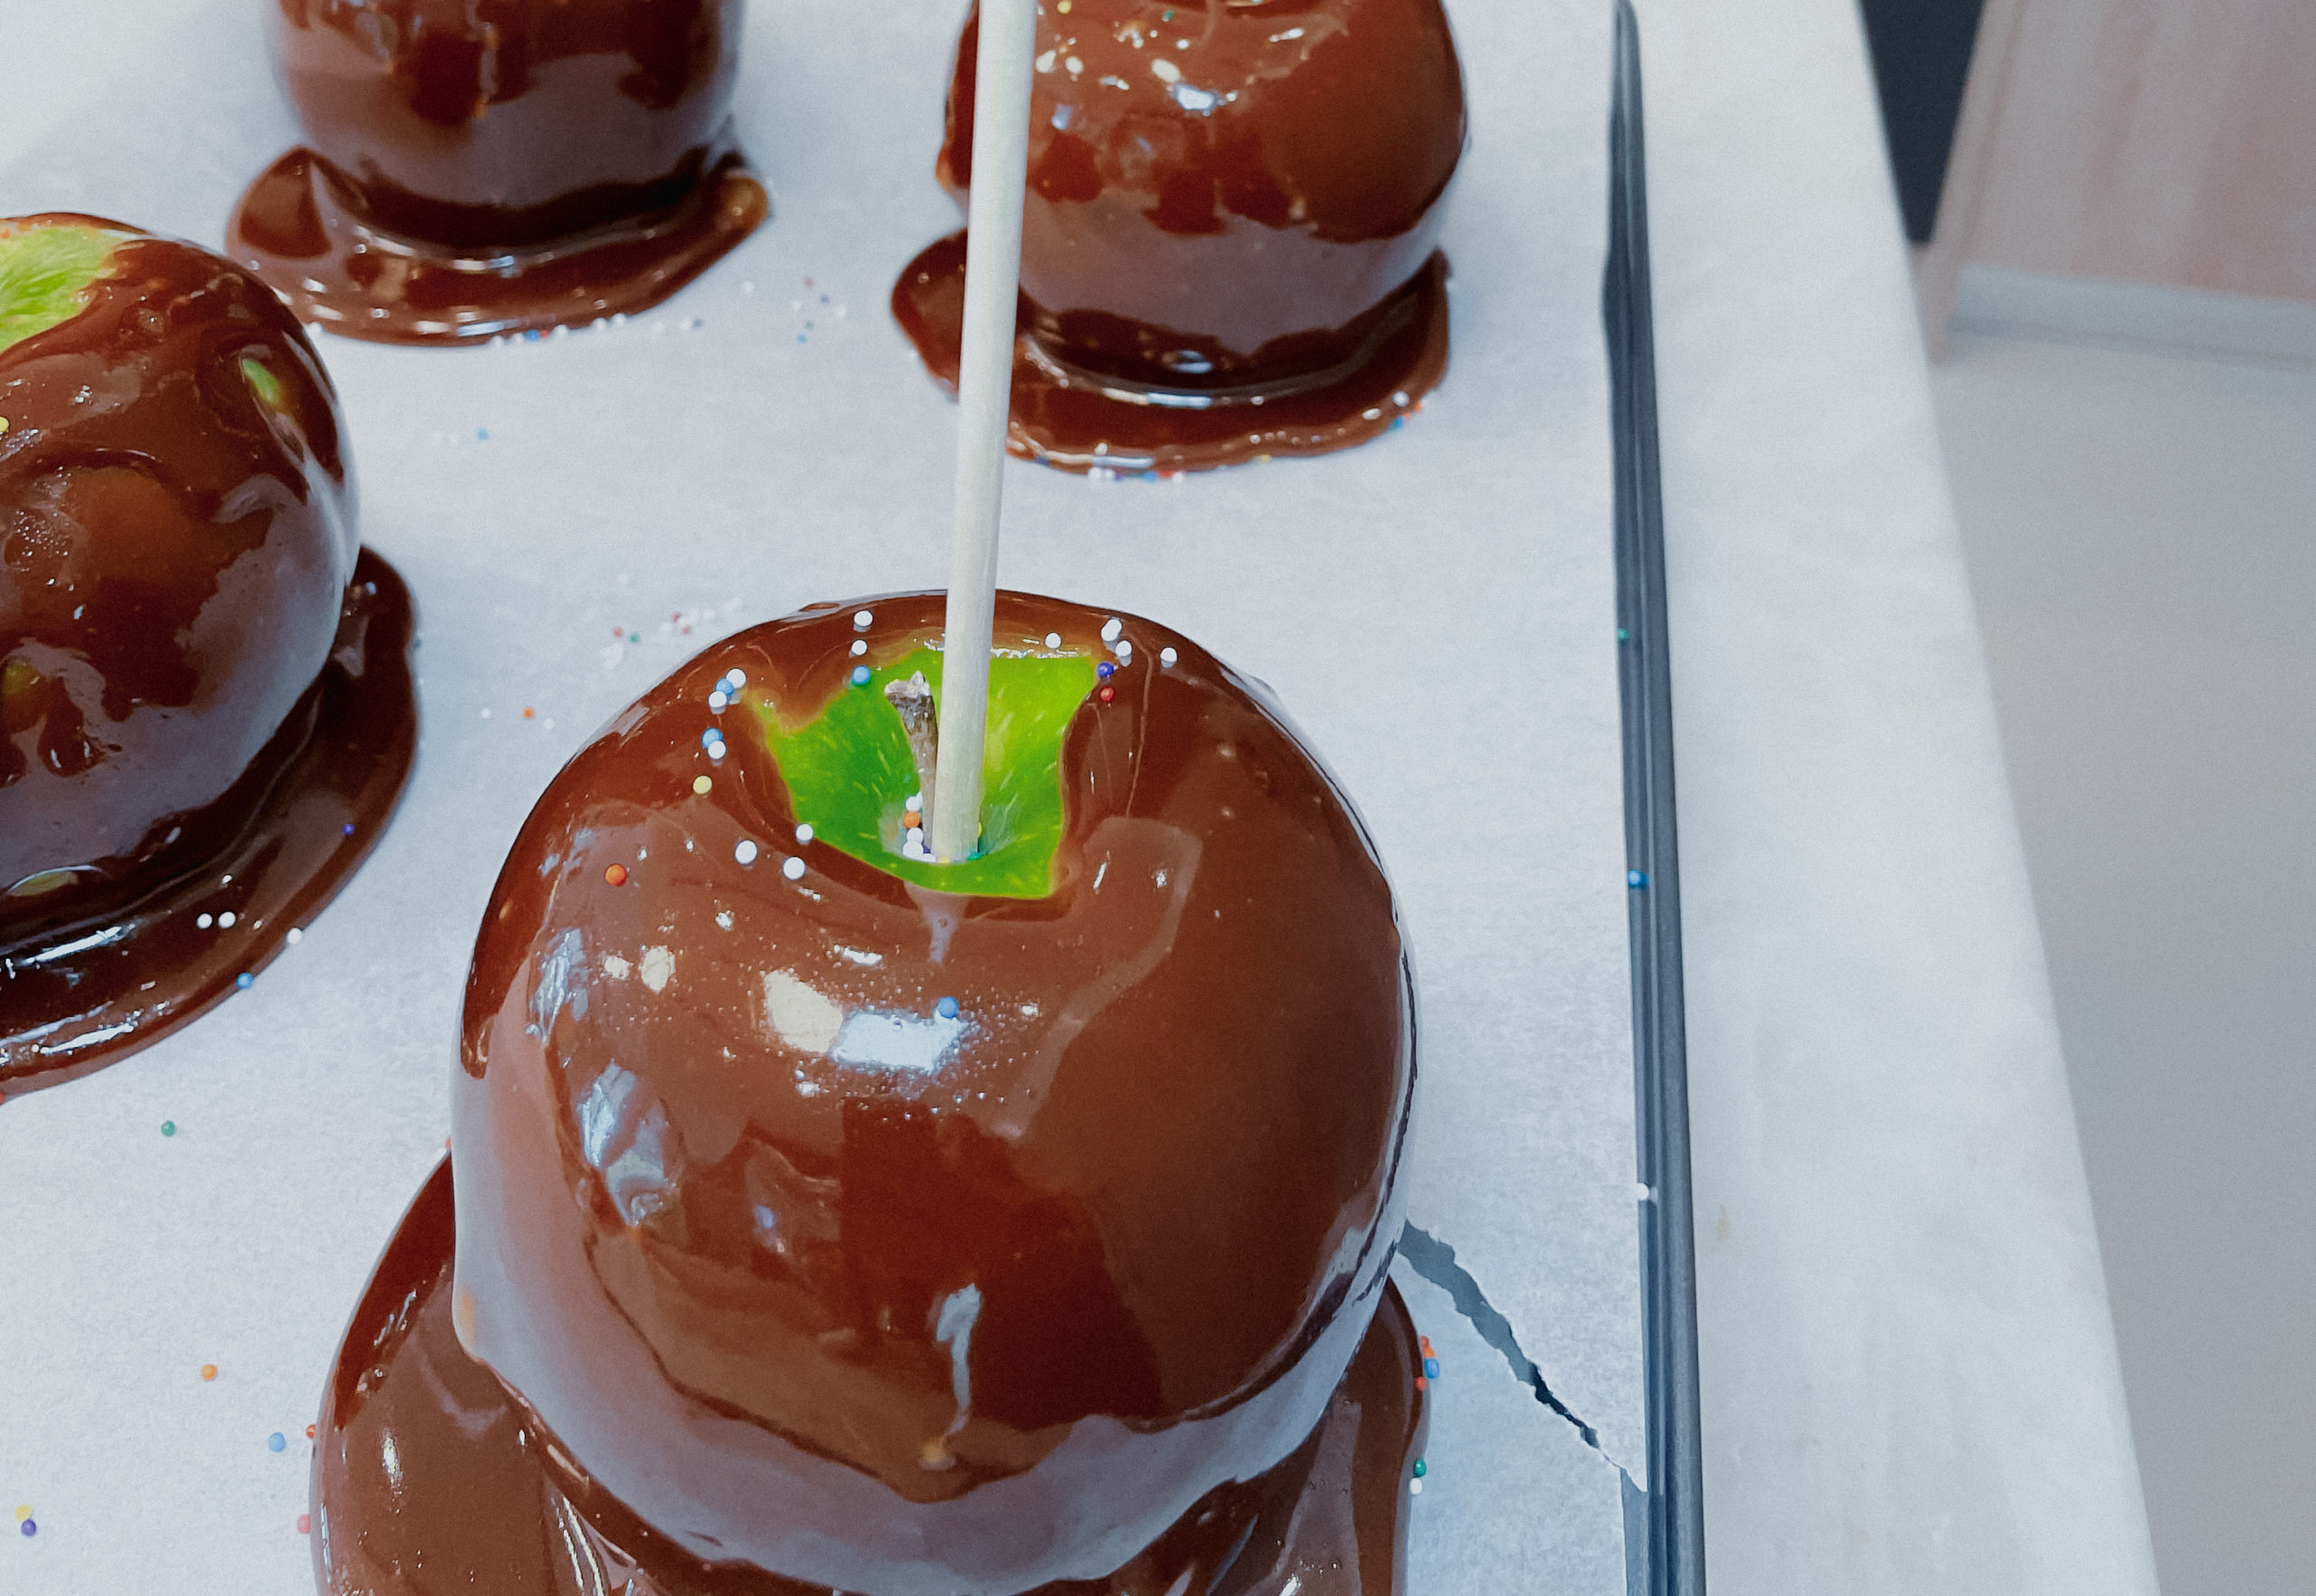 caramel apples recipe by home cooking with julie neville8b